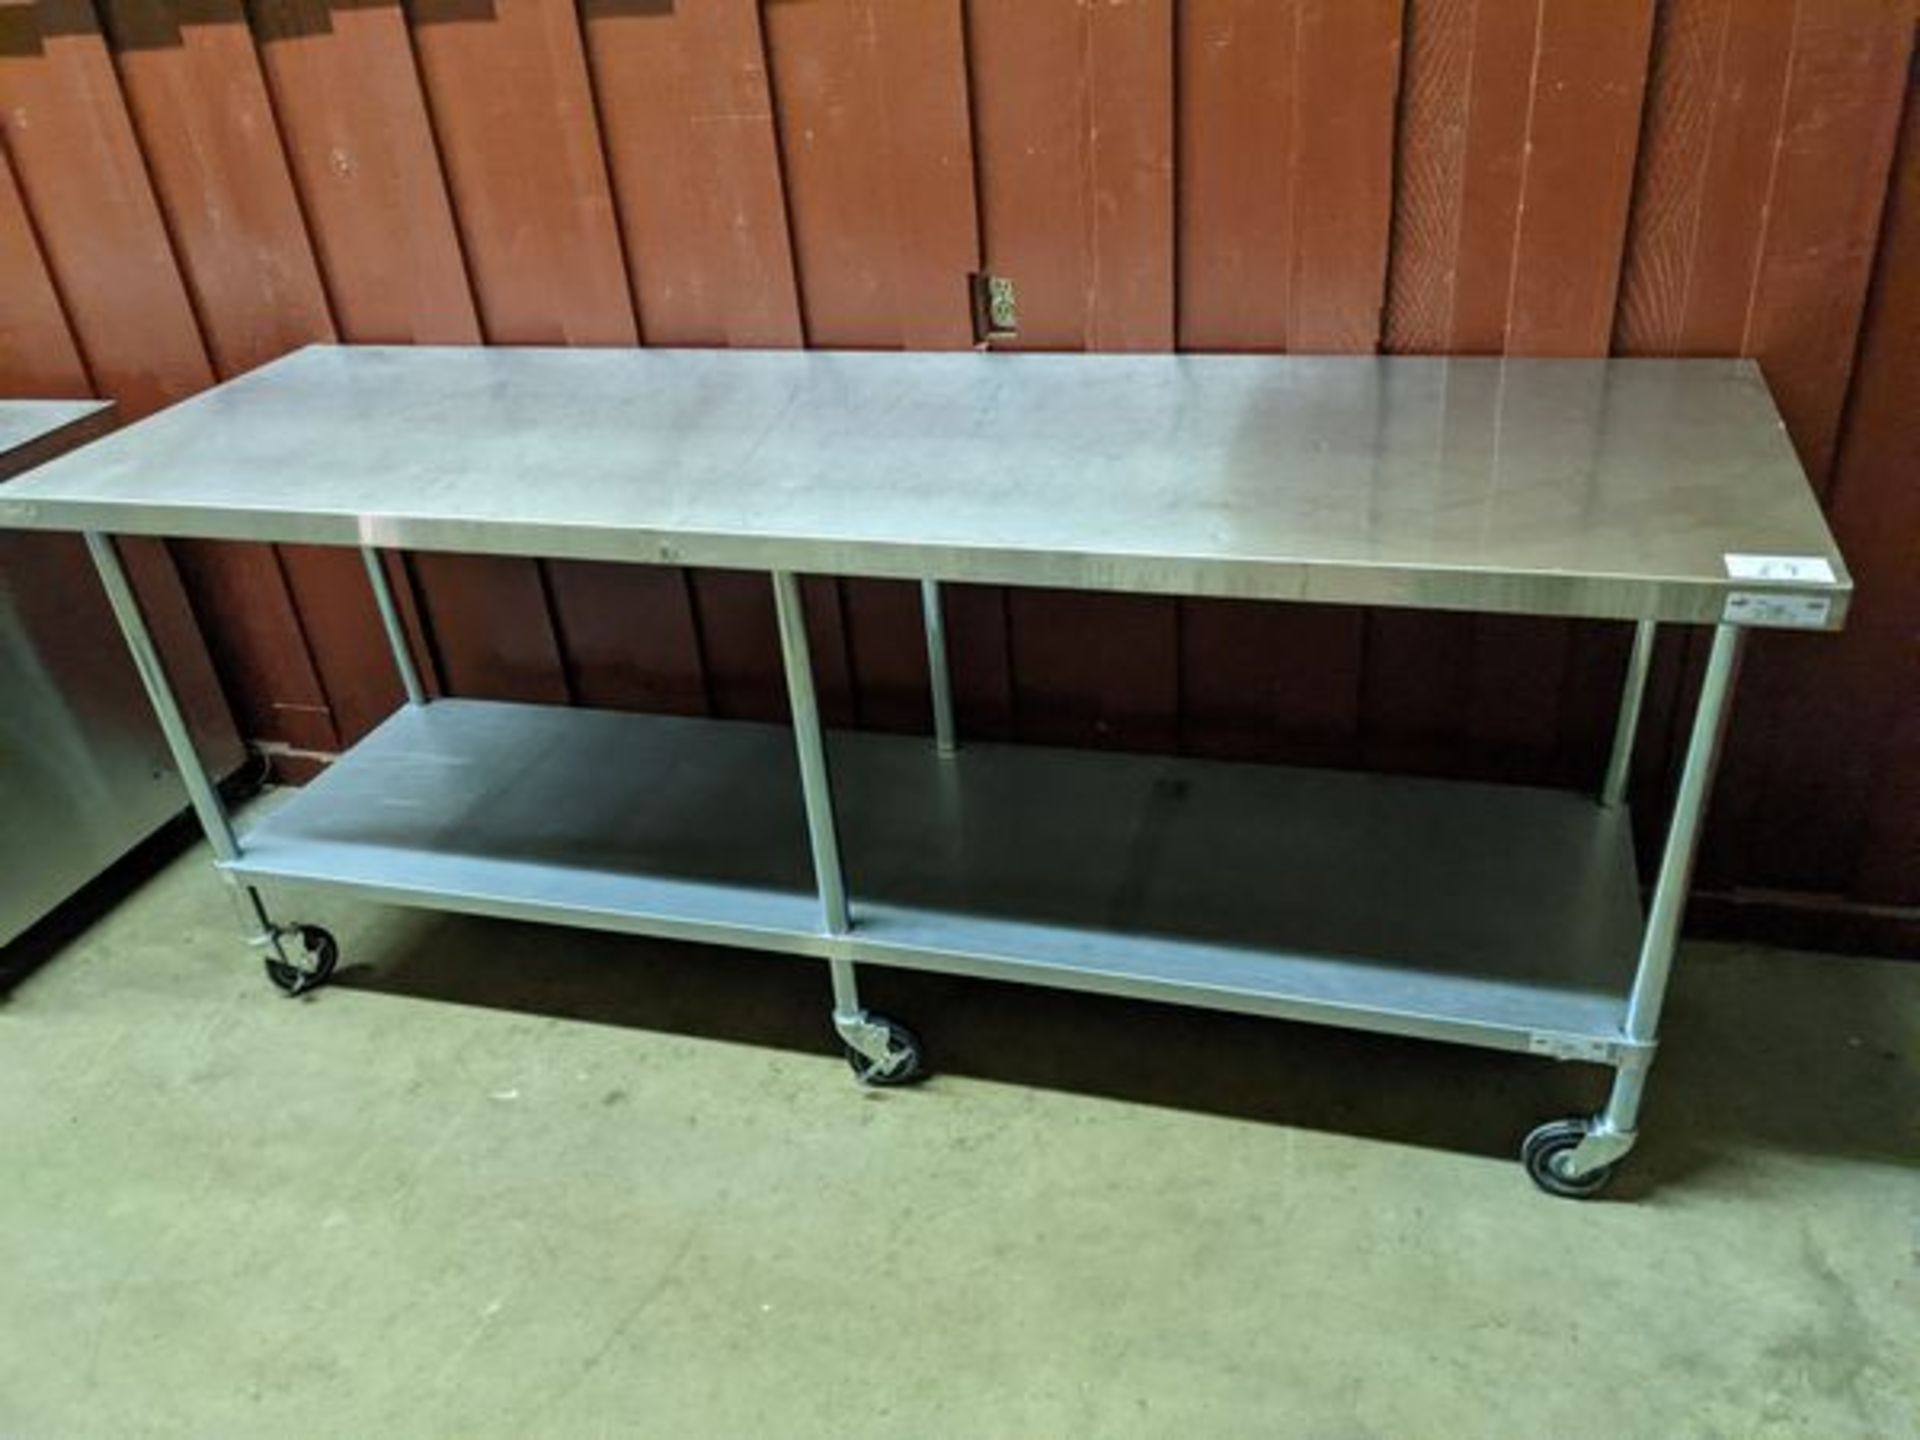 30 x 96" 2 Tier Stainless Steel Work Table on Casters